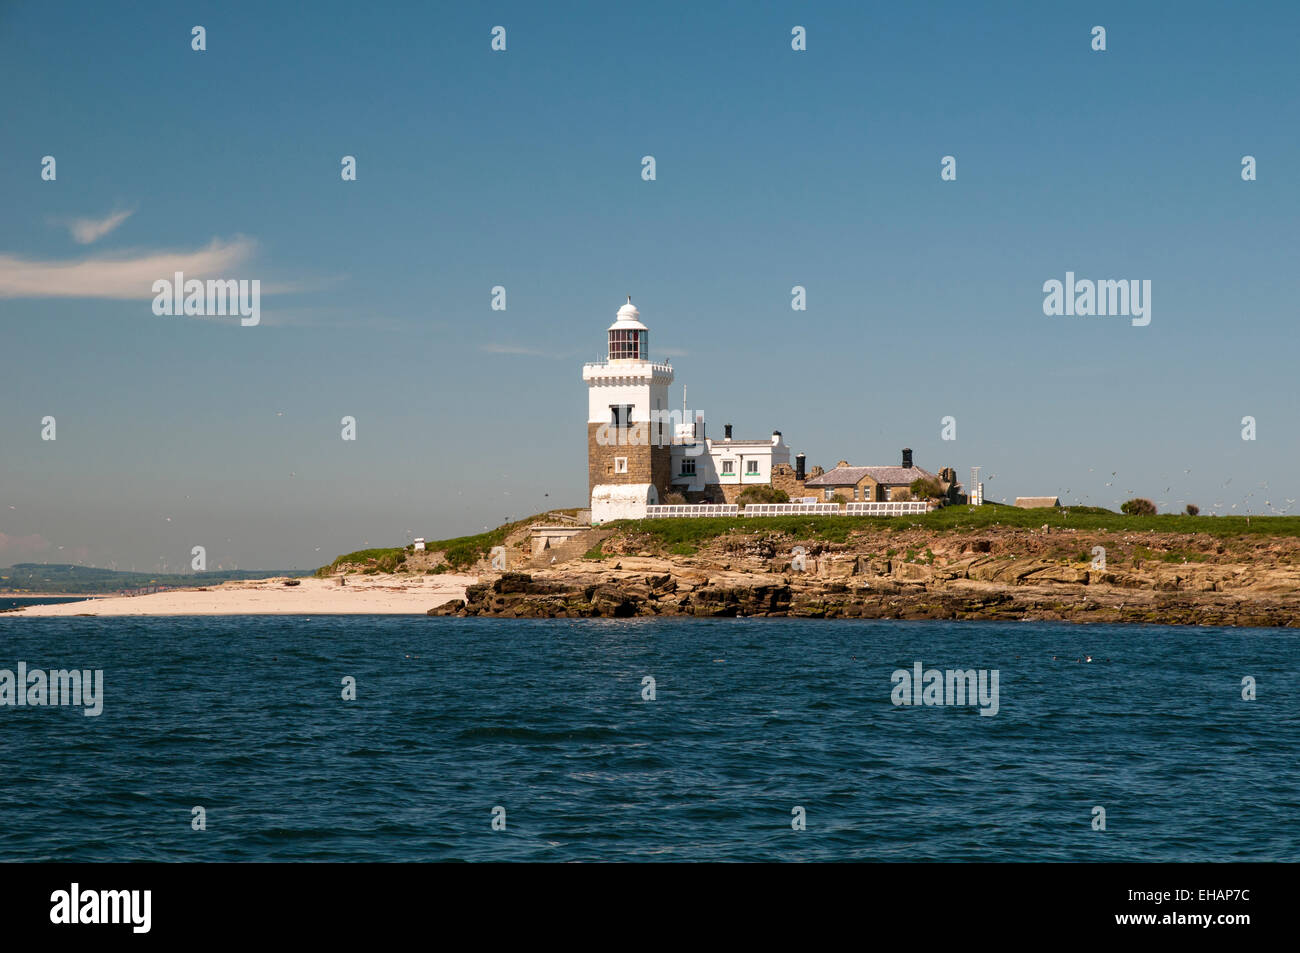 The lighthouse and beach on Coquet Island bird reserve seen from just offshore, Amble Northumberland. June. Stock Photo